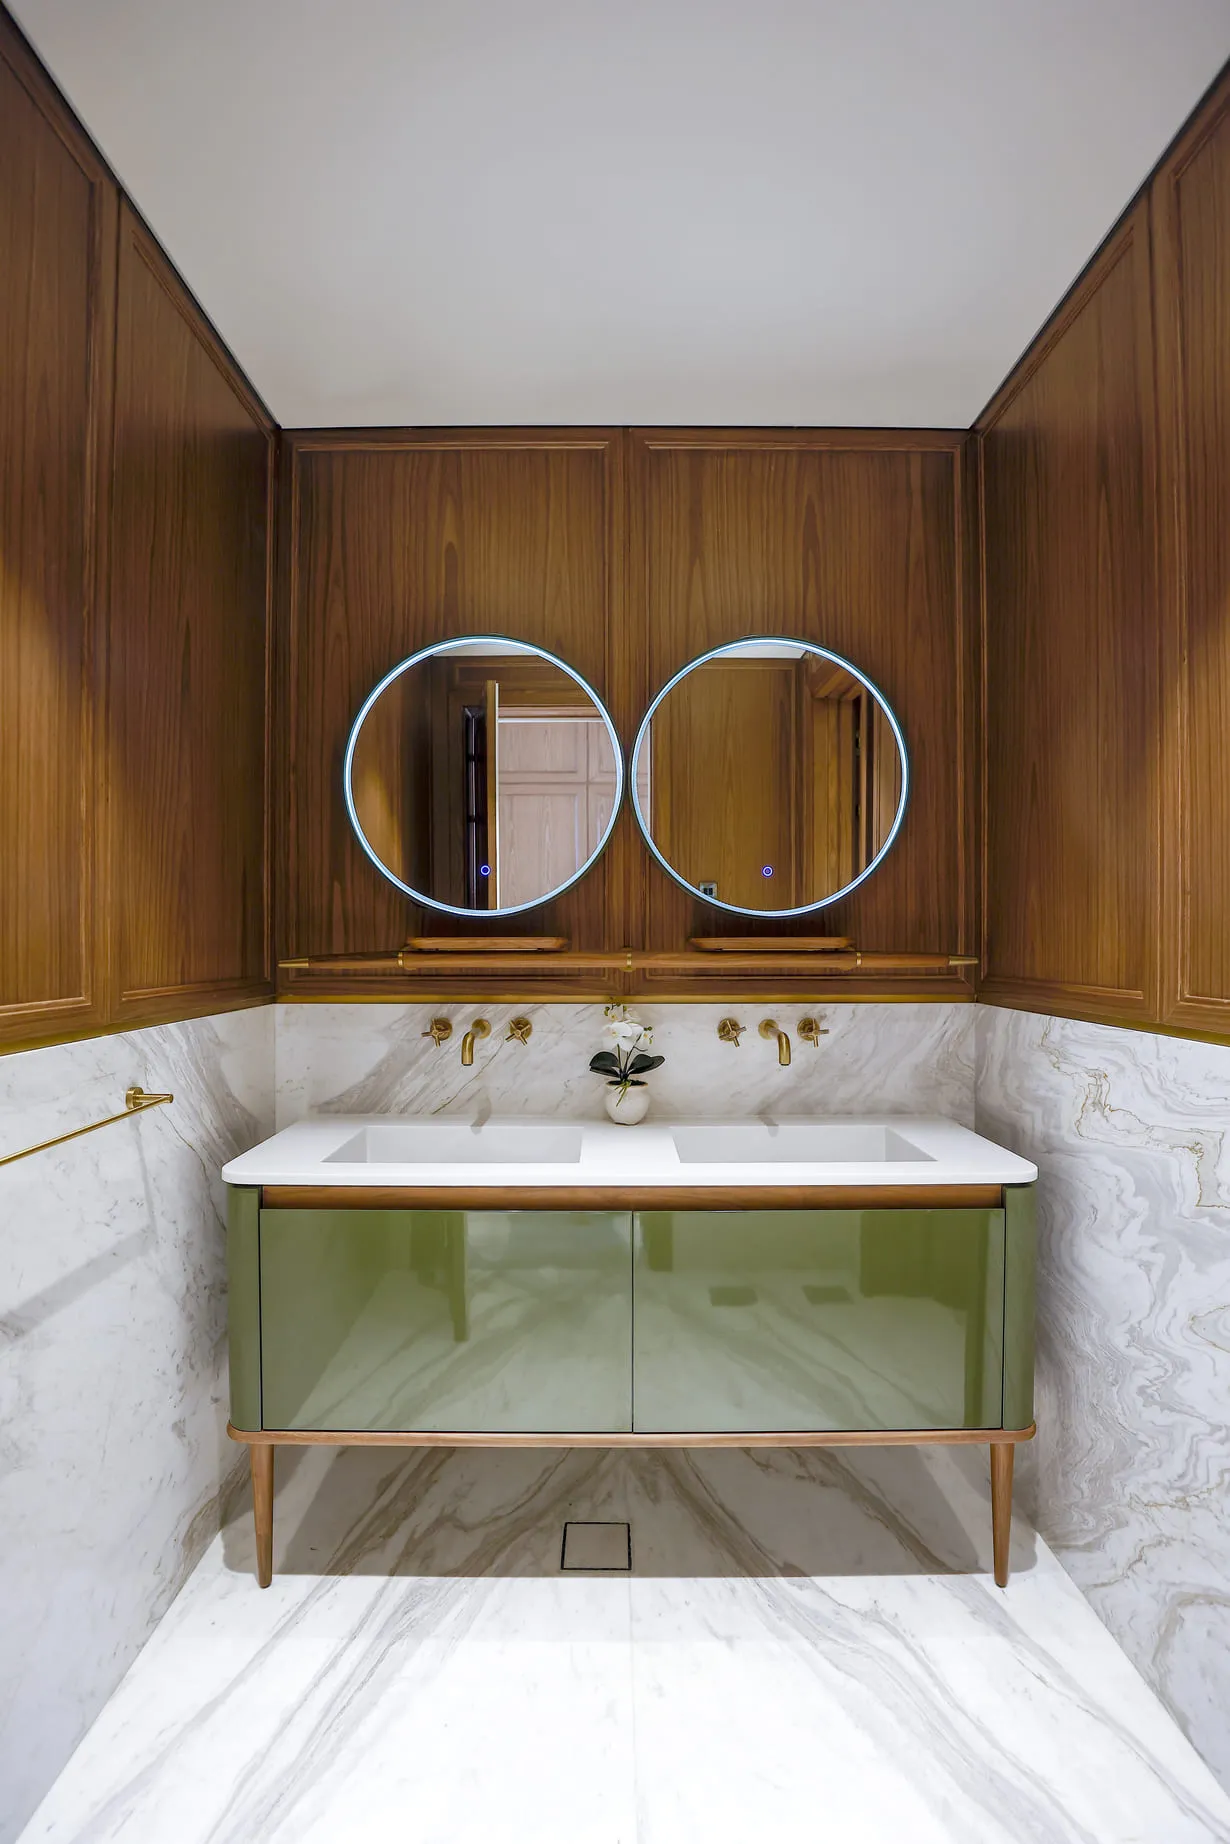 A well-equipped bathroom featuring two mirrors and a sink, offering convenience and functionality for everyday use.